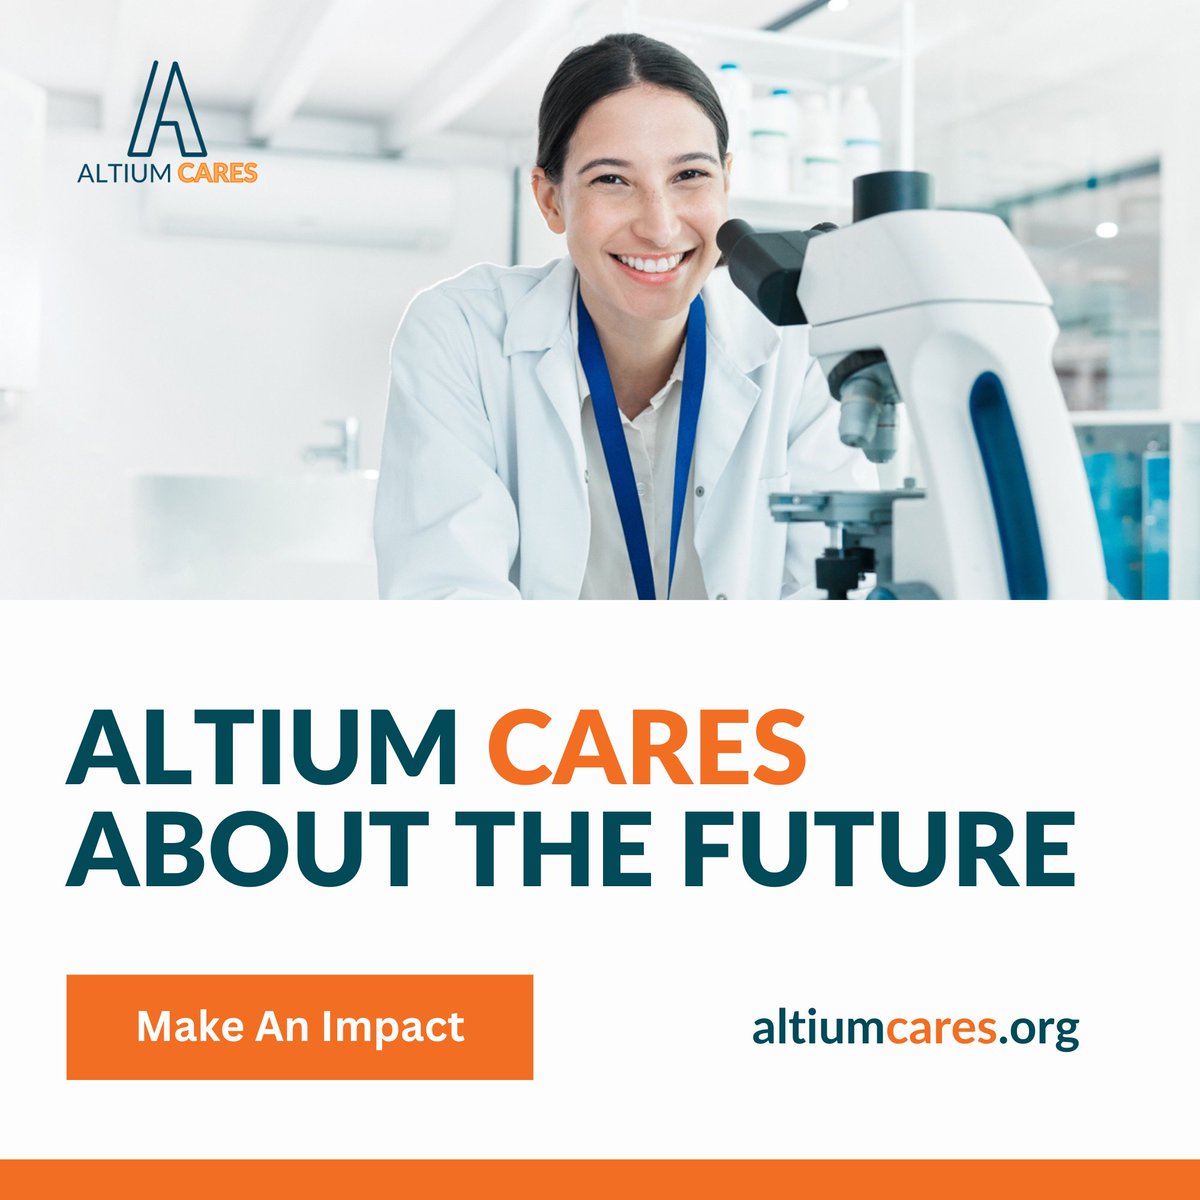 This is where @AltiumCares comes in - bridging the gap between short-term financial returns and the potential behind uncharted, breakthrough medical research. We invite you to join us in this journey of creating a better world for all.

👉 altiumcares.org to learn more.